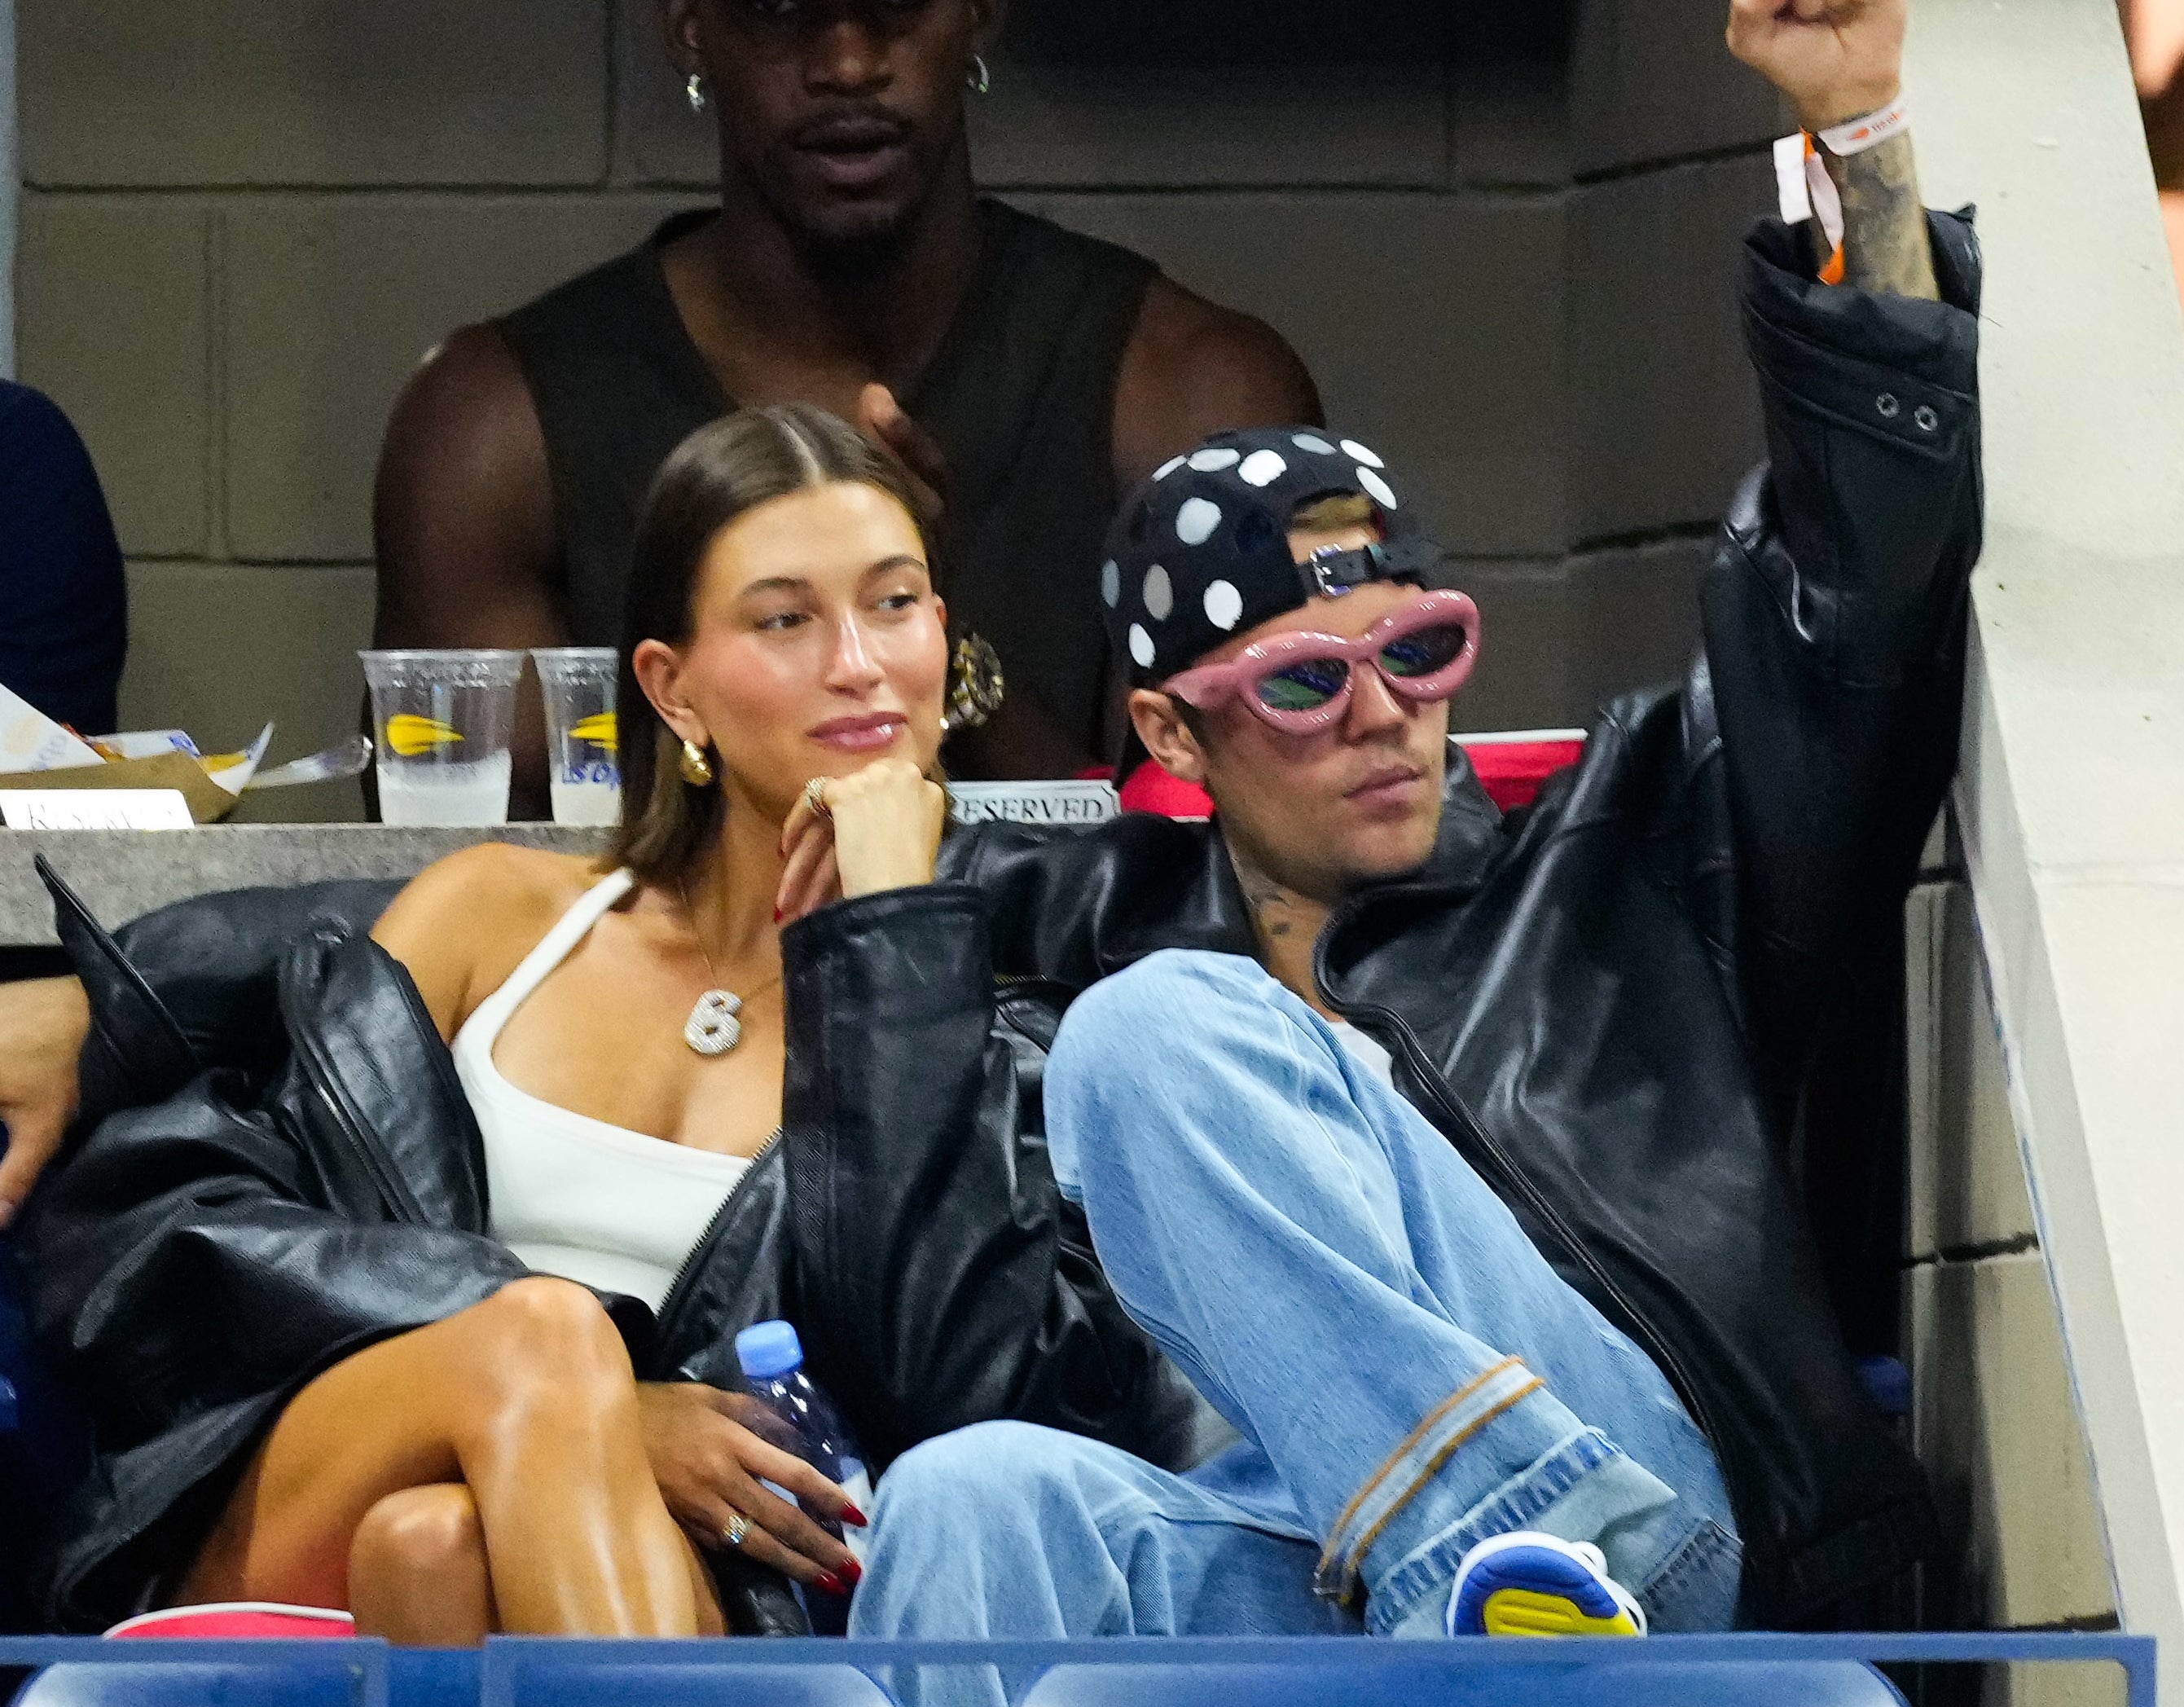 Justin Bieber wearing a leather jacket and cap seated beside Hailey Bieber at a sports event